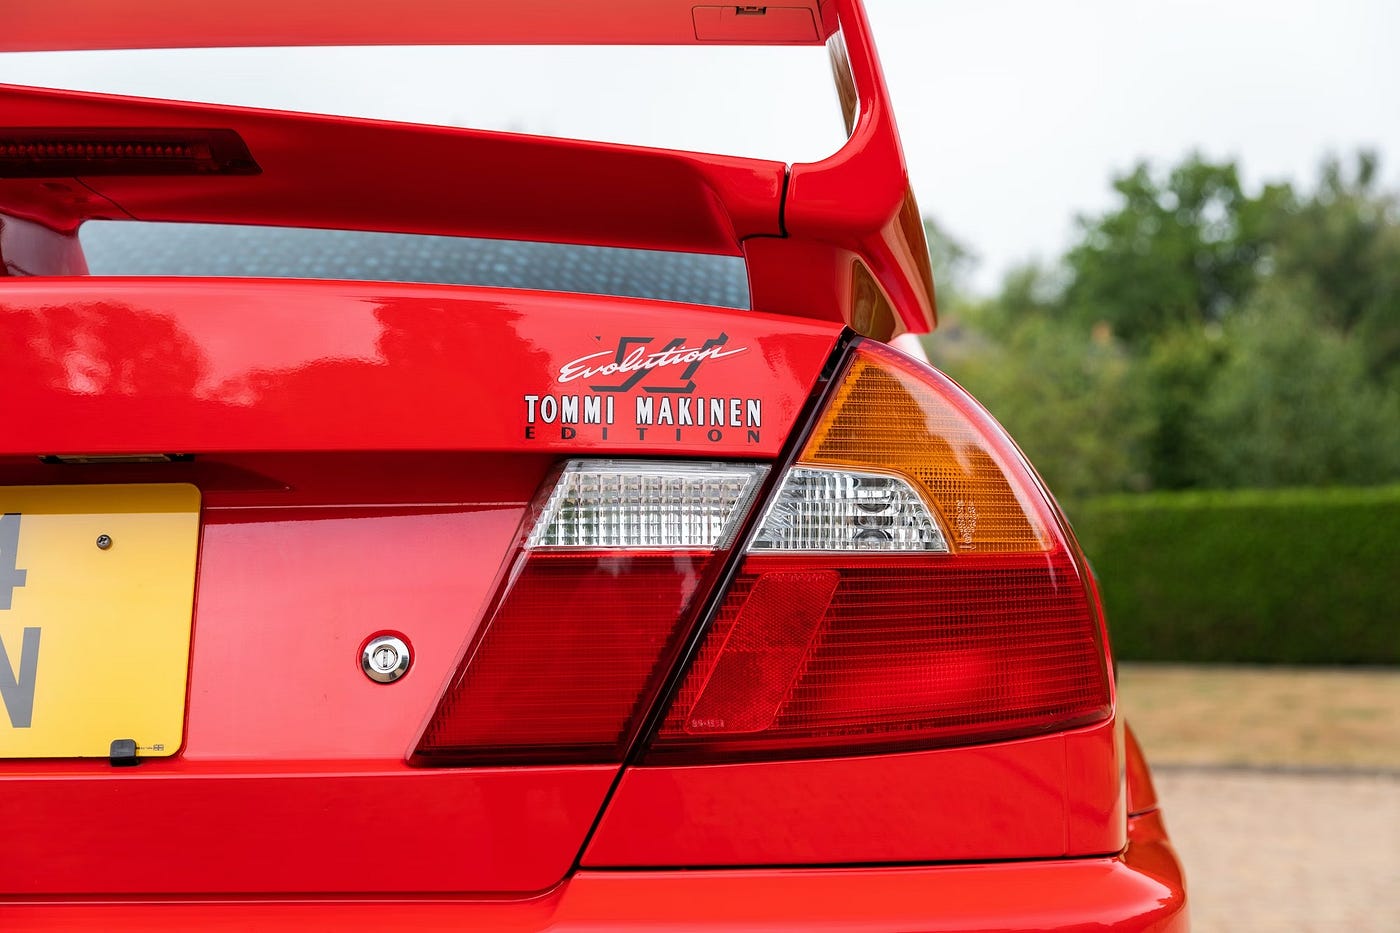 What is so special about the Mitsubishi Lancer Evolution VI Tommi Mäkinen  Edition? | by Stuart Brown | Drivers Supply | Oct, 2023 | Medium